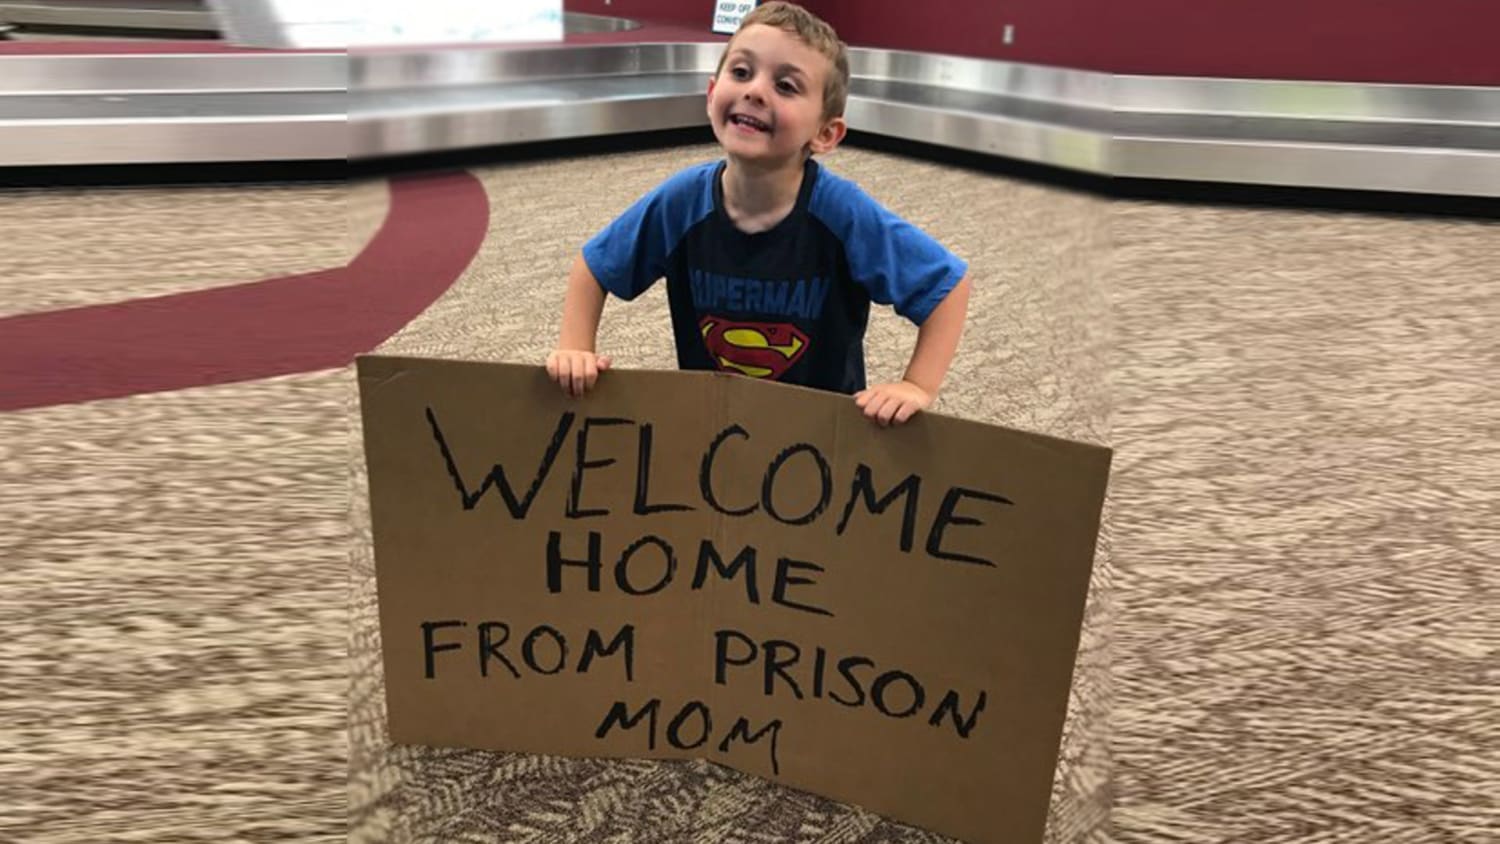 Son tricks mom with 'Welcome home from prison' sign at airport